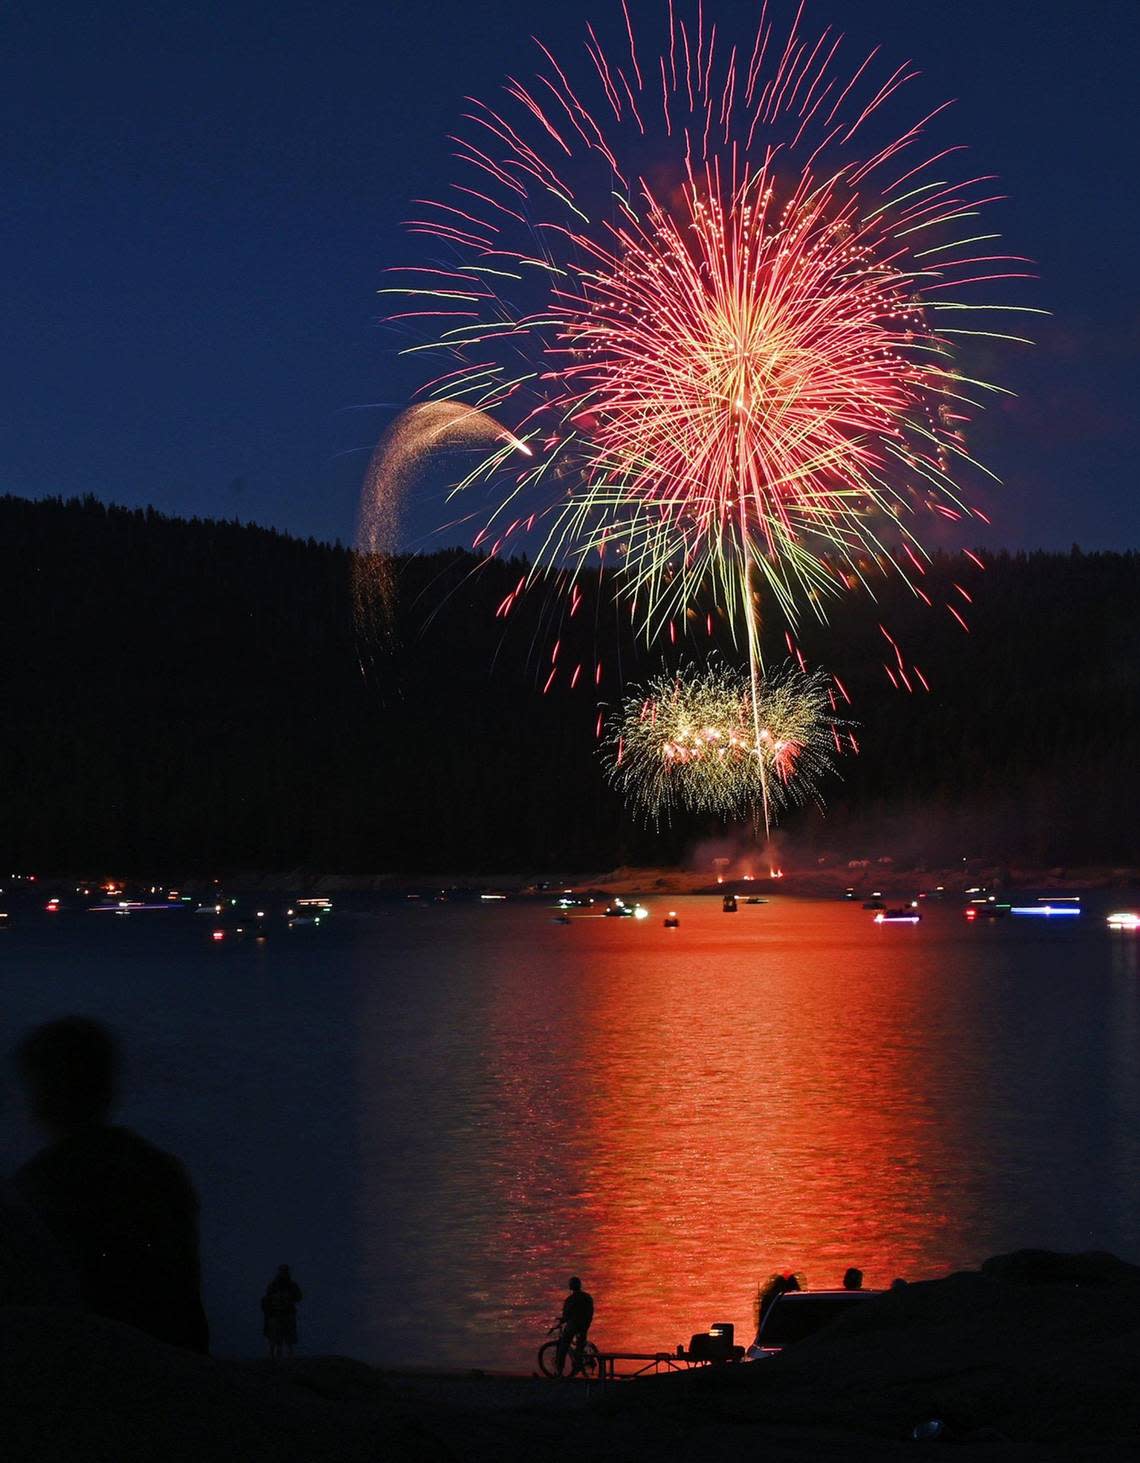 A cyclist and families watch from the shoreline at the 2022 Shaver Lake fireworks show Saturday, July 2, 2022 at Shaver Lake. A boat parade started at 6pm and the fireworks which began at dark were visible along the shore for thousands who came to celebrate.